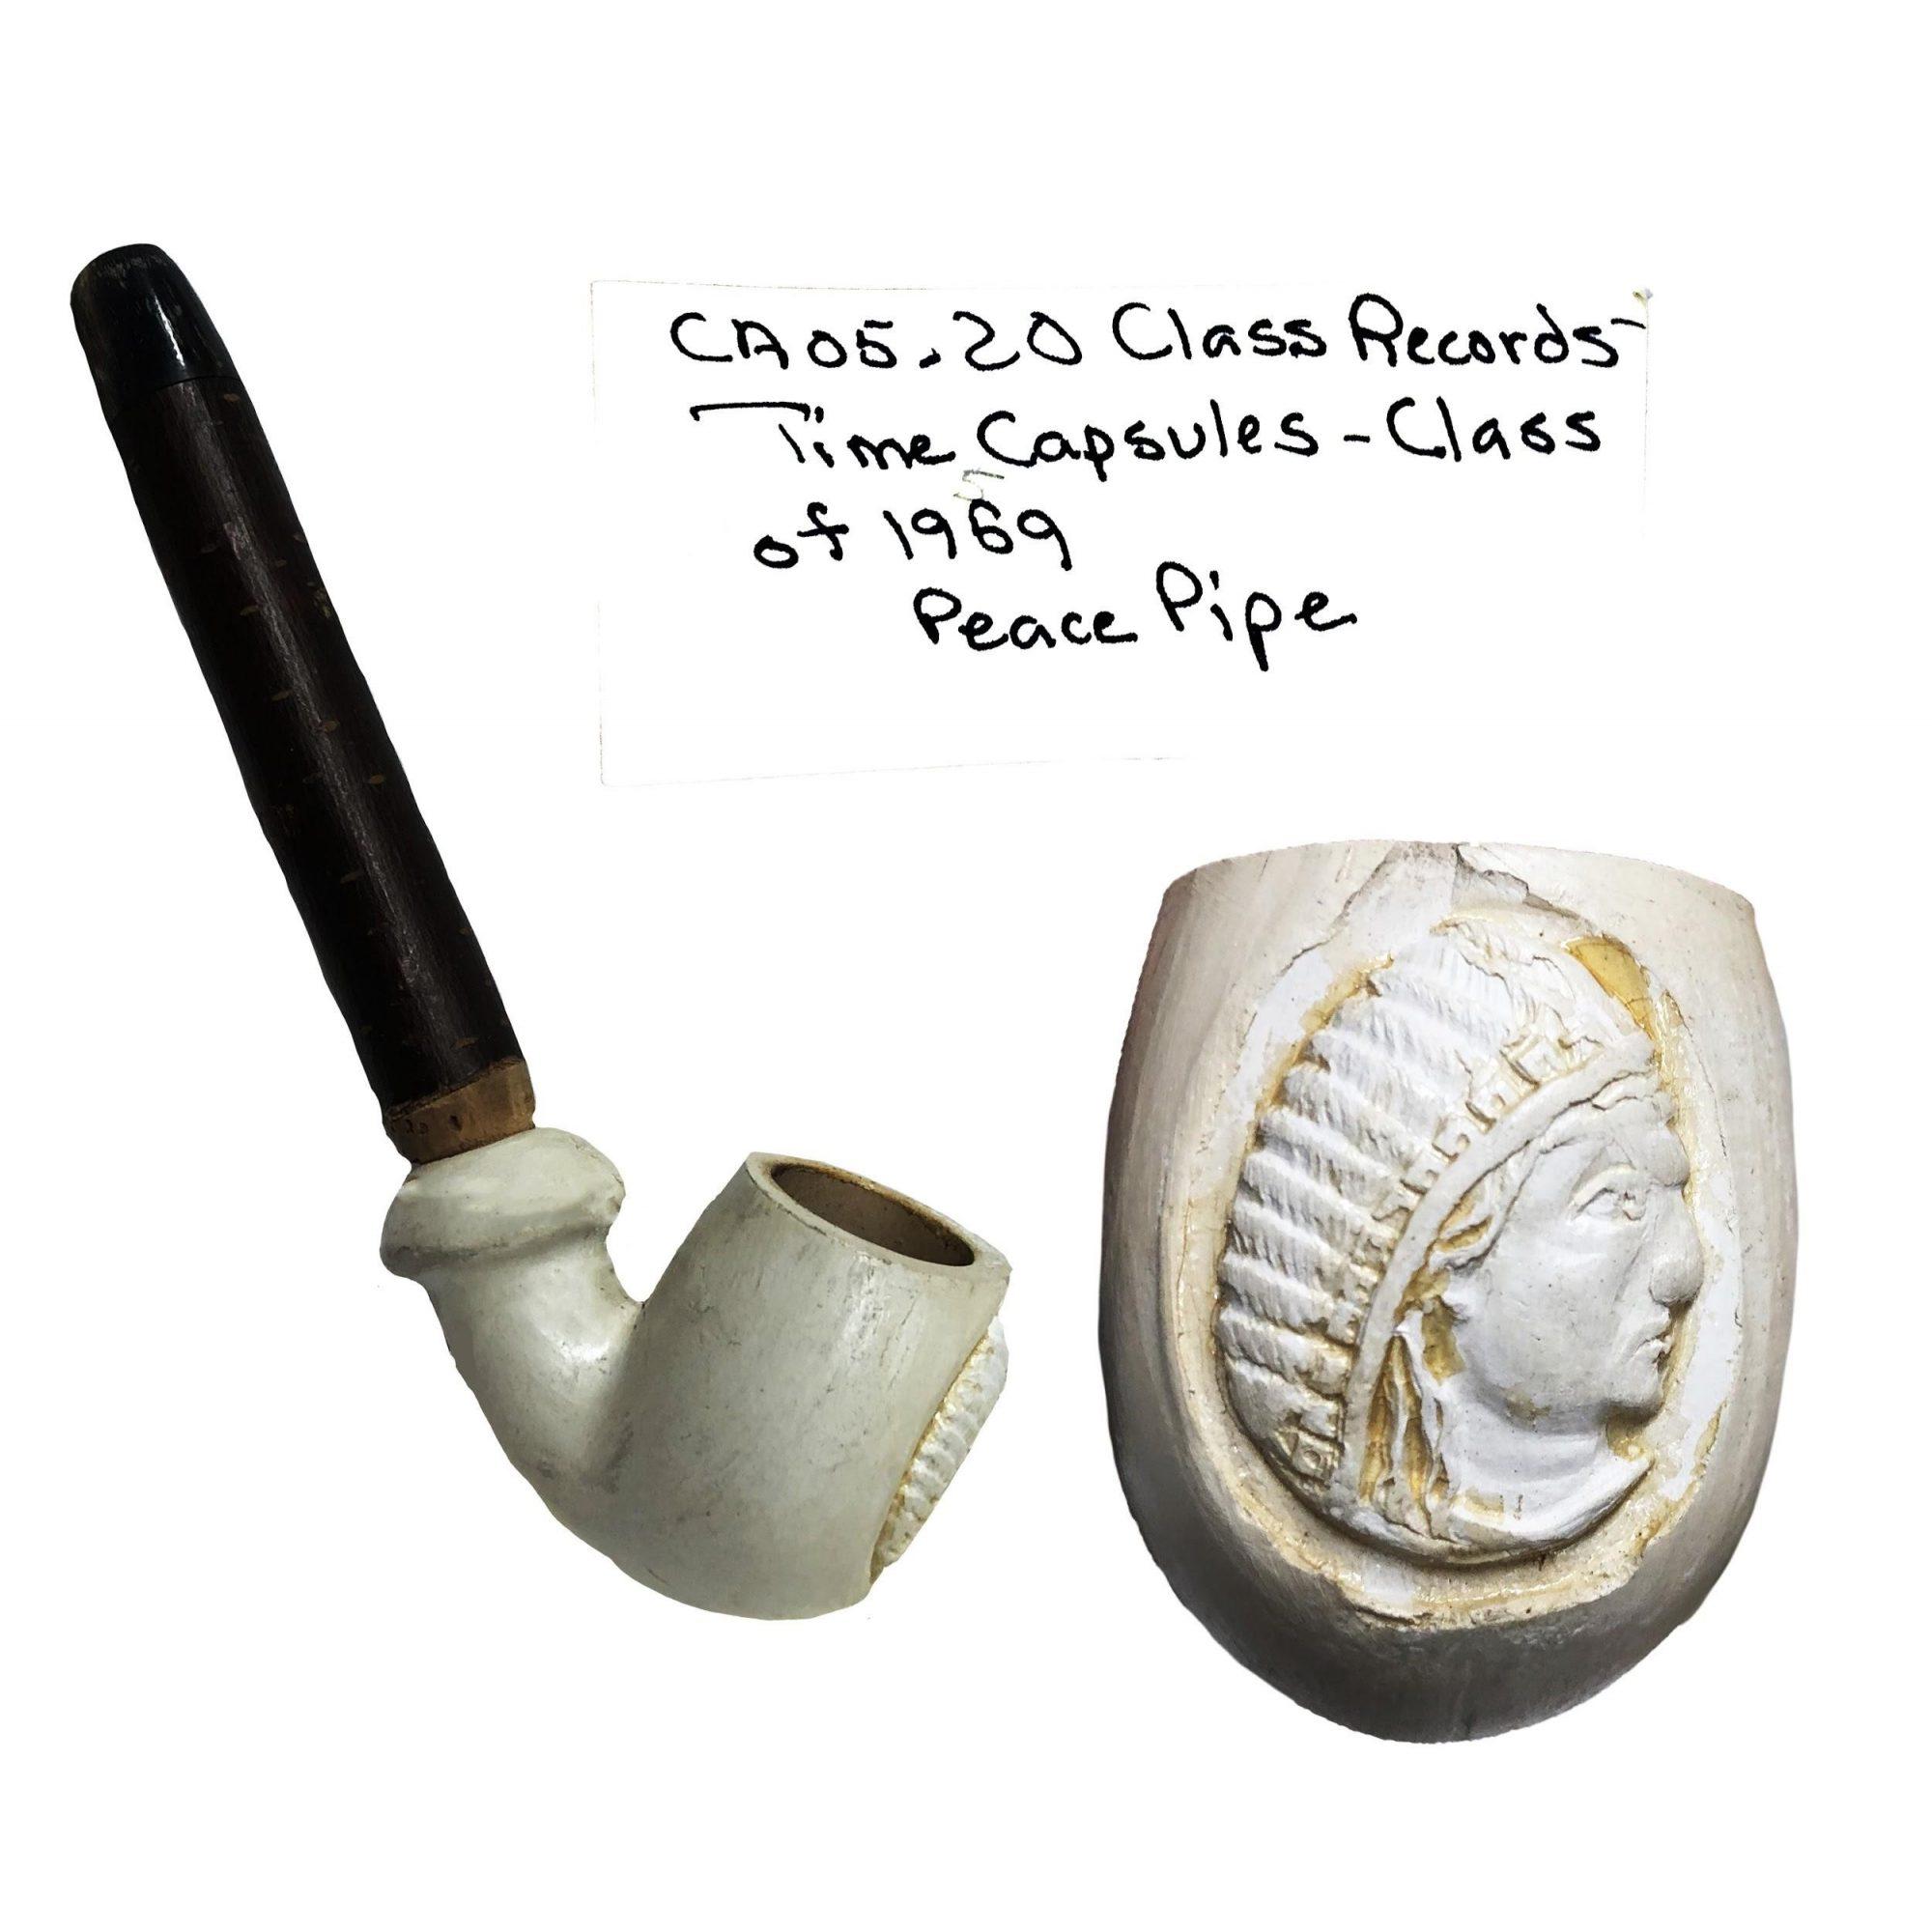 Class of 1969 peace pipe found in Muskie Archives